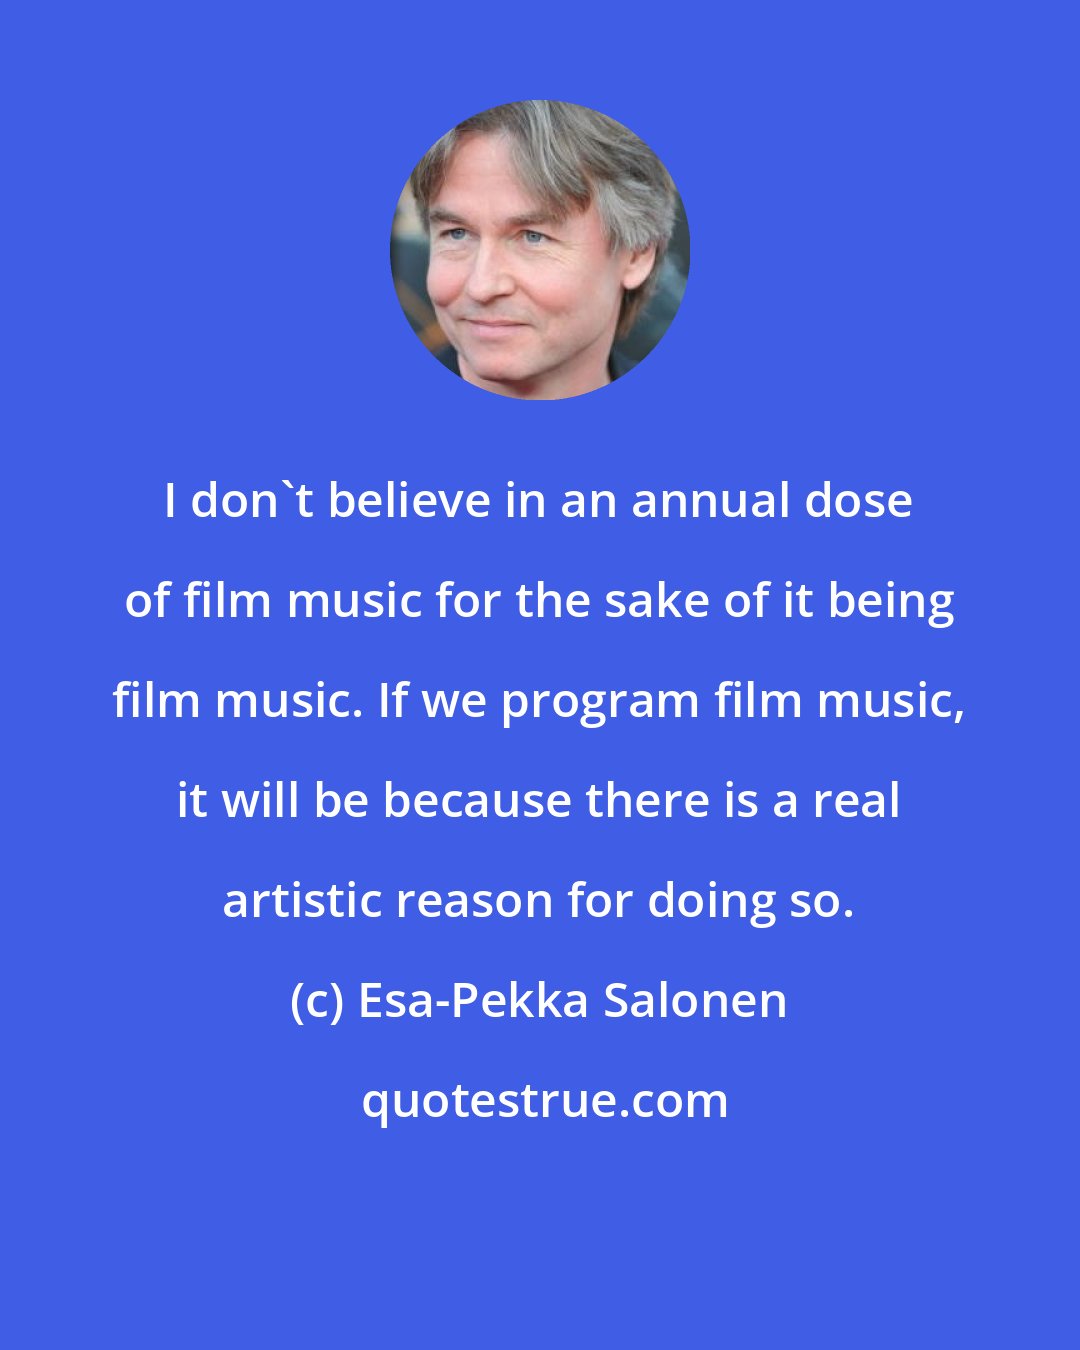 Esa-Pekka Salonen: I don't believe in an annual dose of film music for the sake of it being film music. If we program film music, it will be because there is a real artistic reason for doing so.